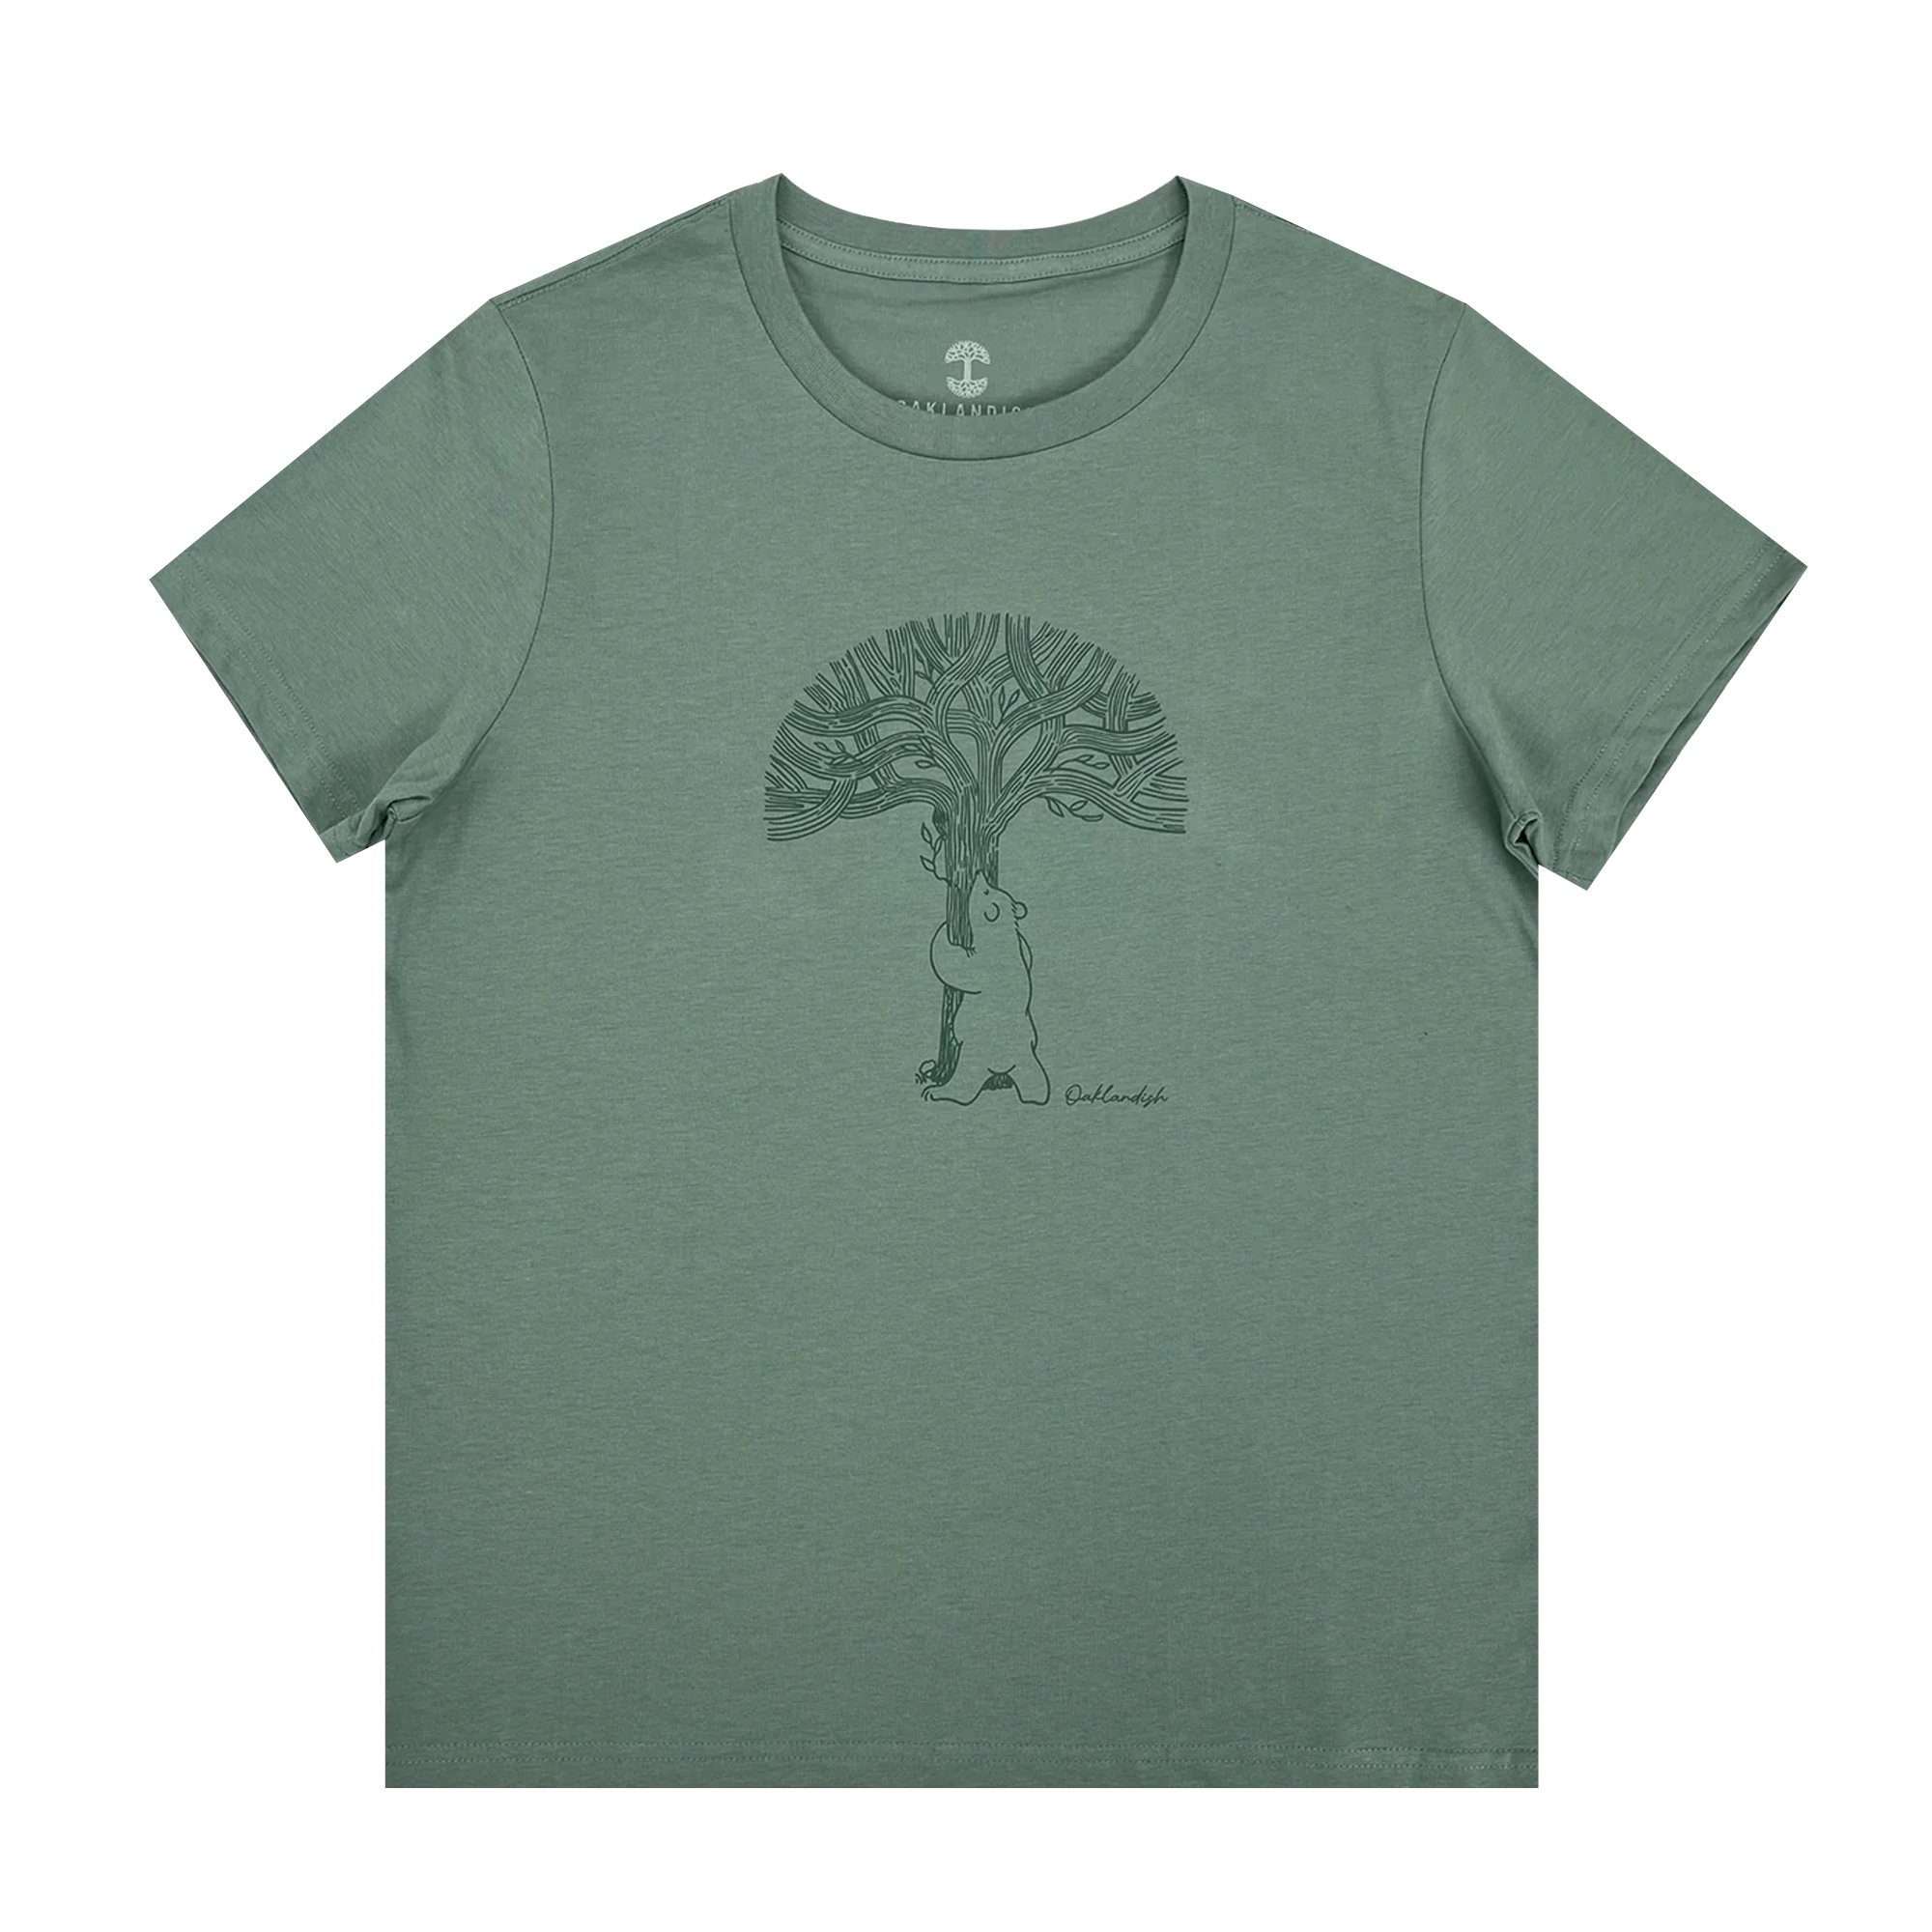 Women’s cut sage green t-shirt with line graphic of a bear hugging a tree representing Oaklandish.